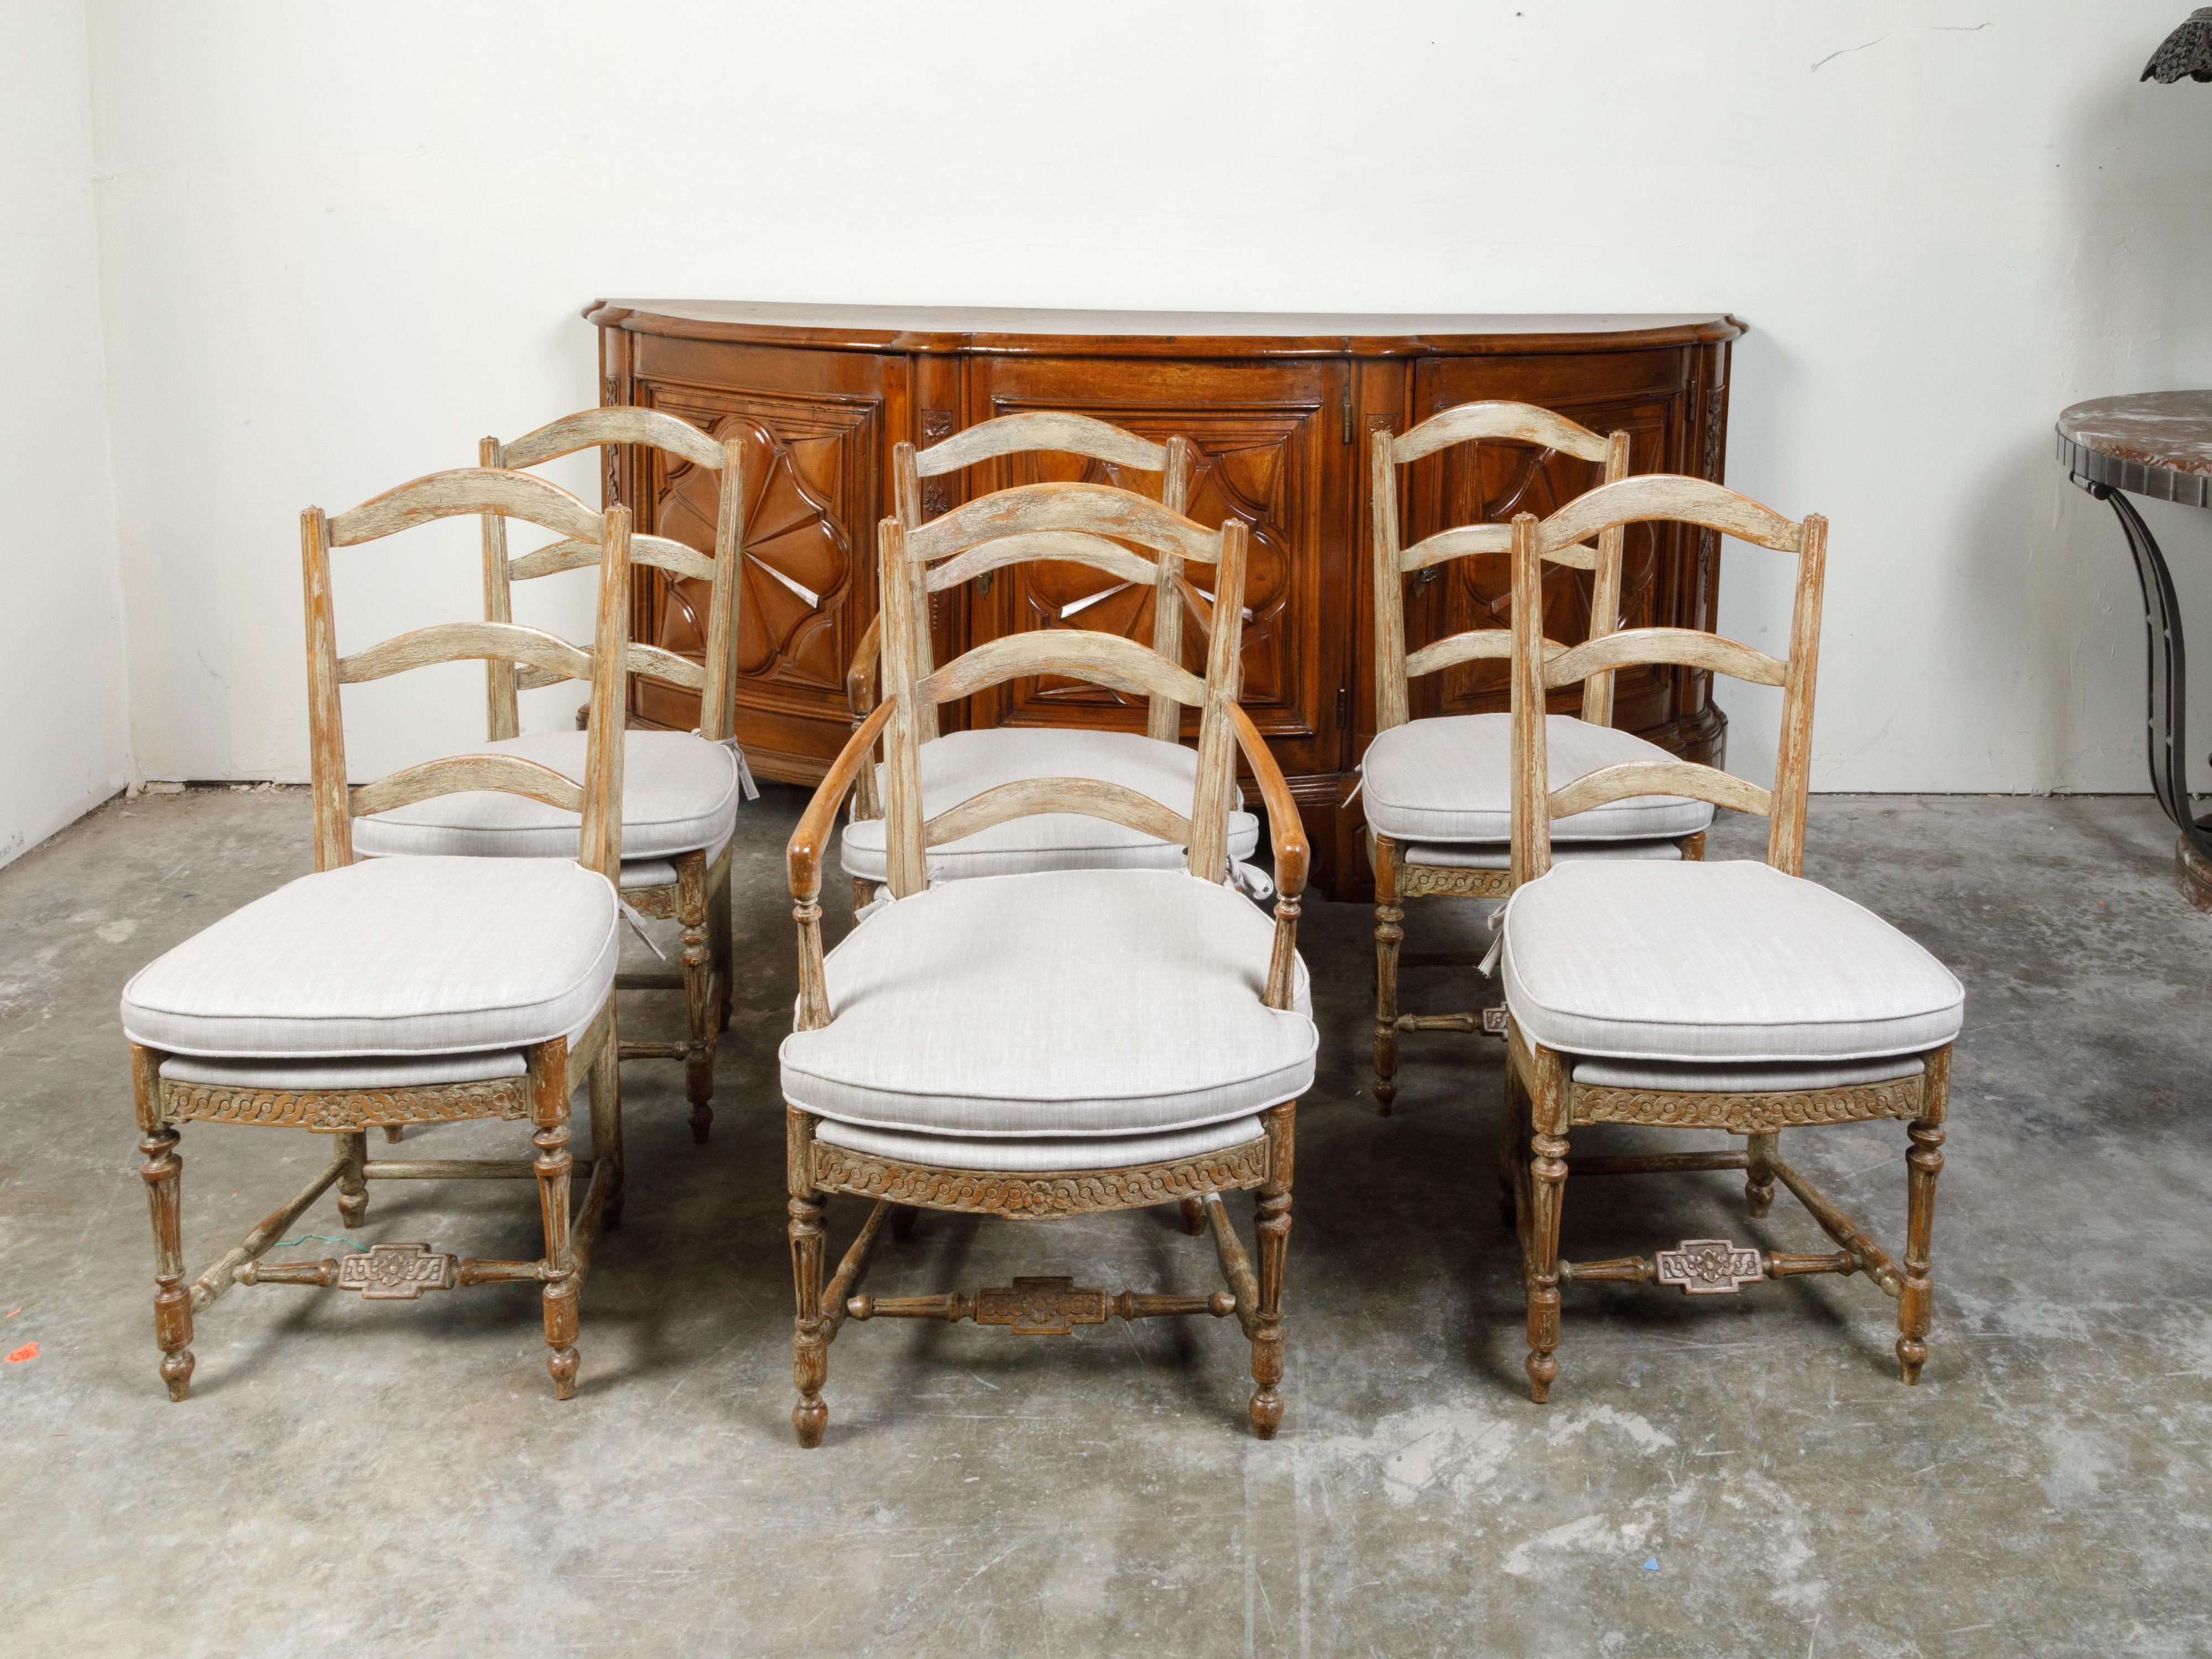 A set of six French wooden dining room chairs from the 19th century, with four sides, two arms, carved guilloche motifs and custom cushions. Created in France during the 19th century, each of this set of dining chairs features a curving ladder back